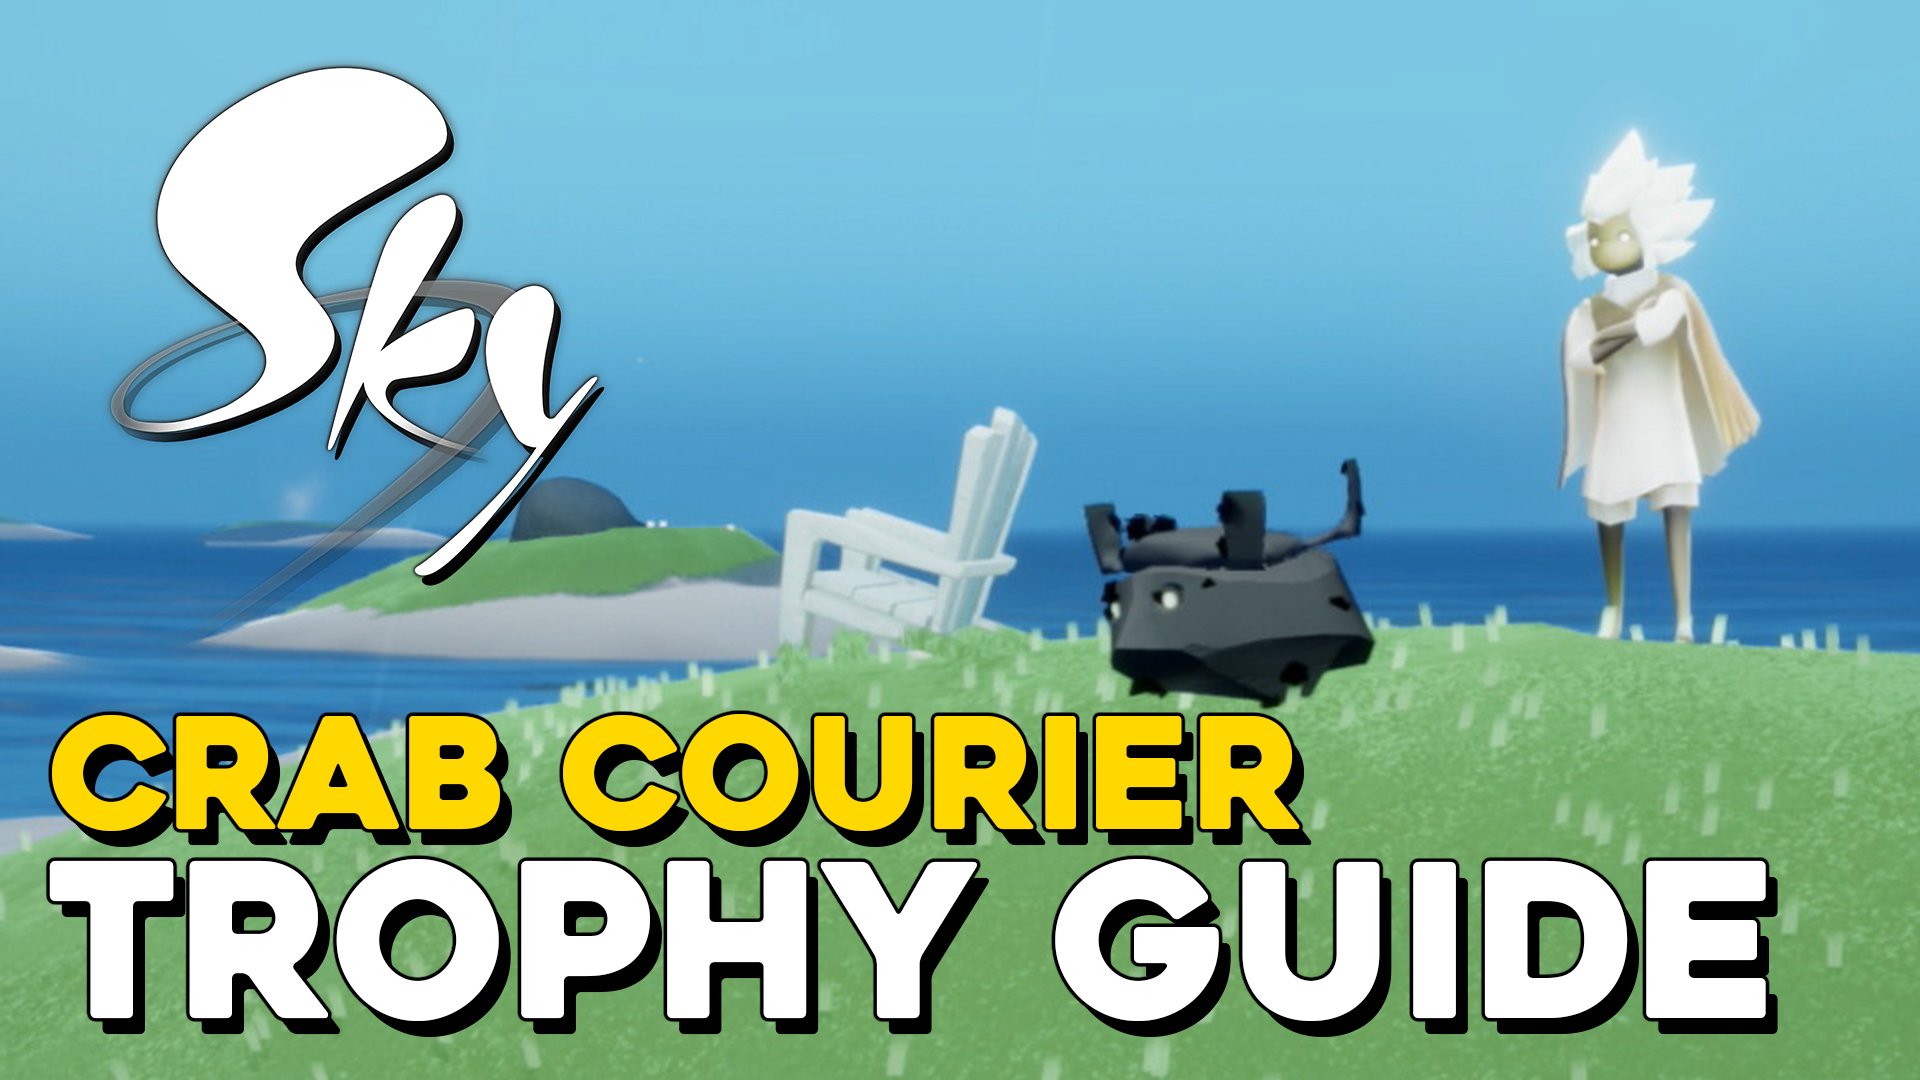 Sky Children Of The Light Crab Courier Trophy Guide.jpg